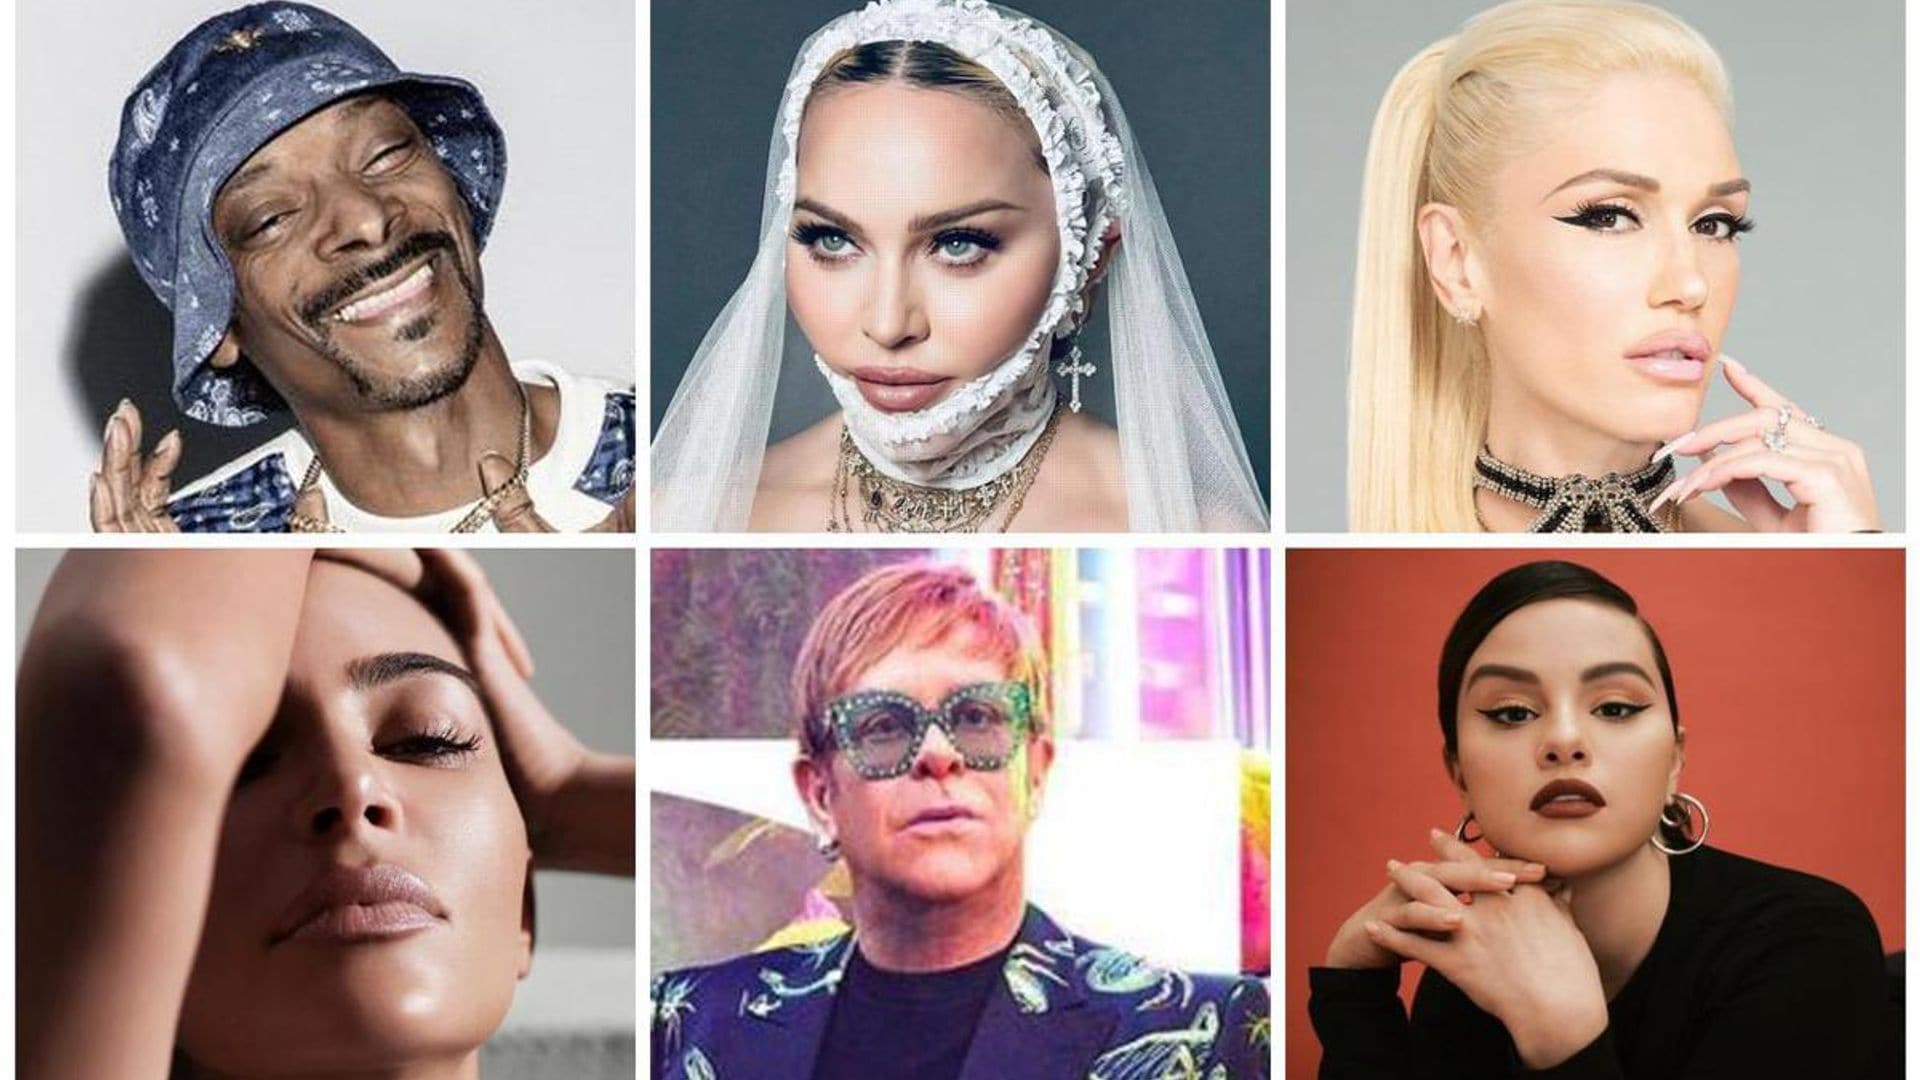 Watch the 10 Best Celebrity TikToks of the Week: Will Smith, Gwen Stefani, Madonna, and more